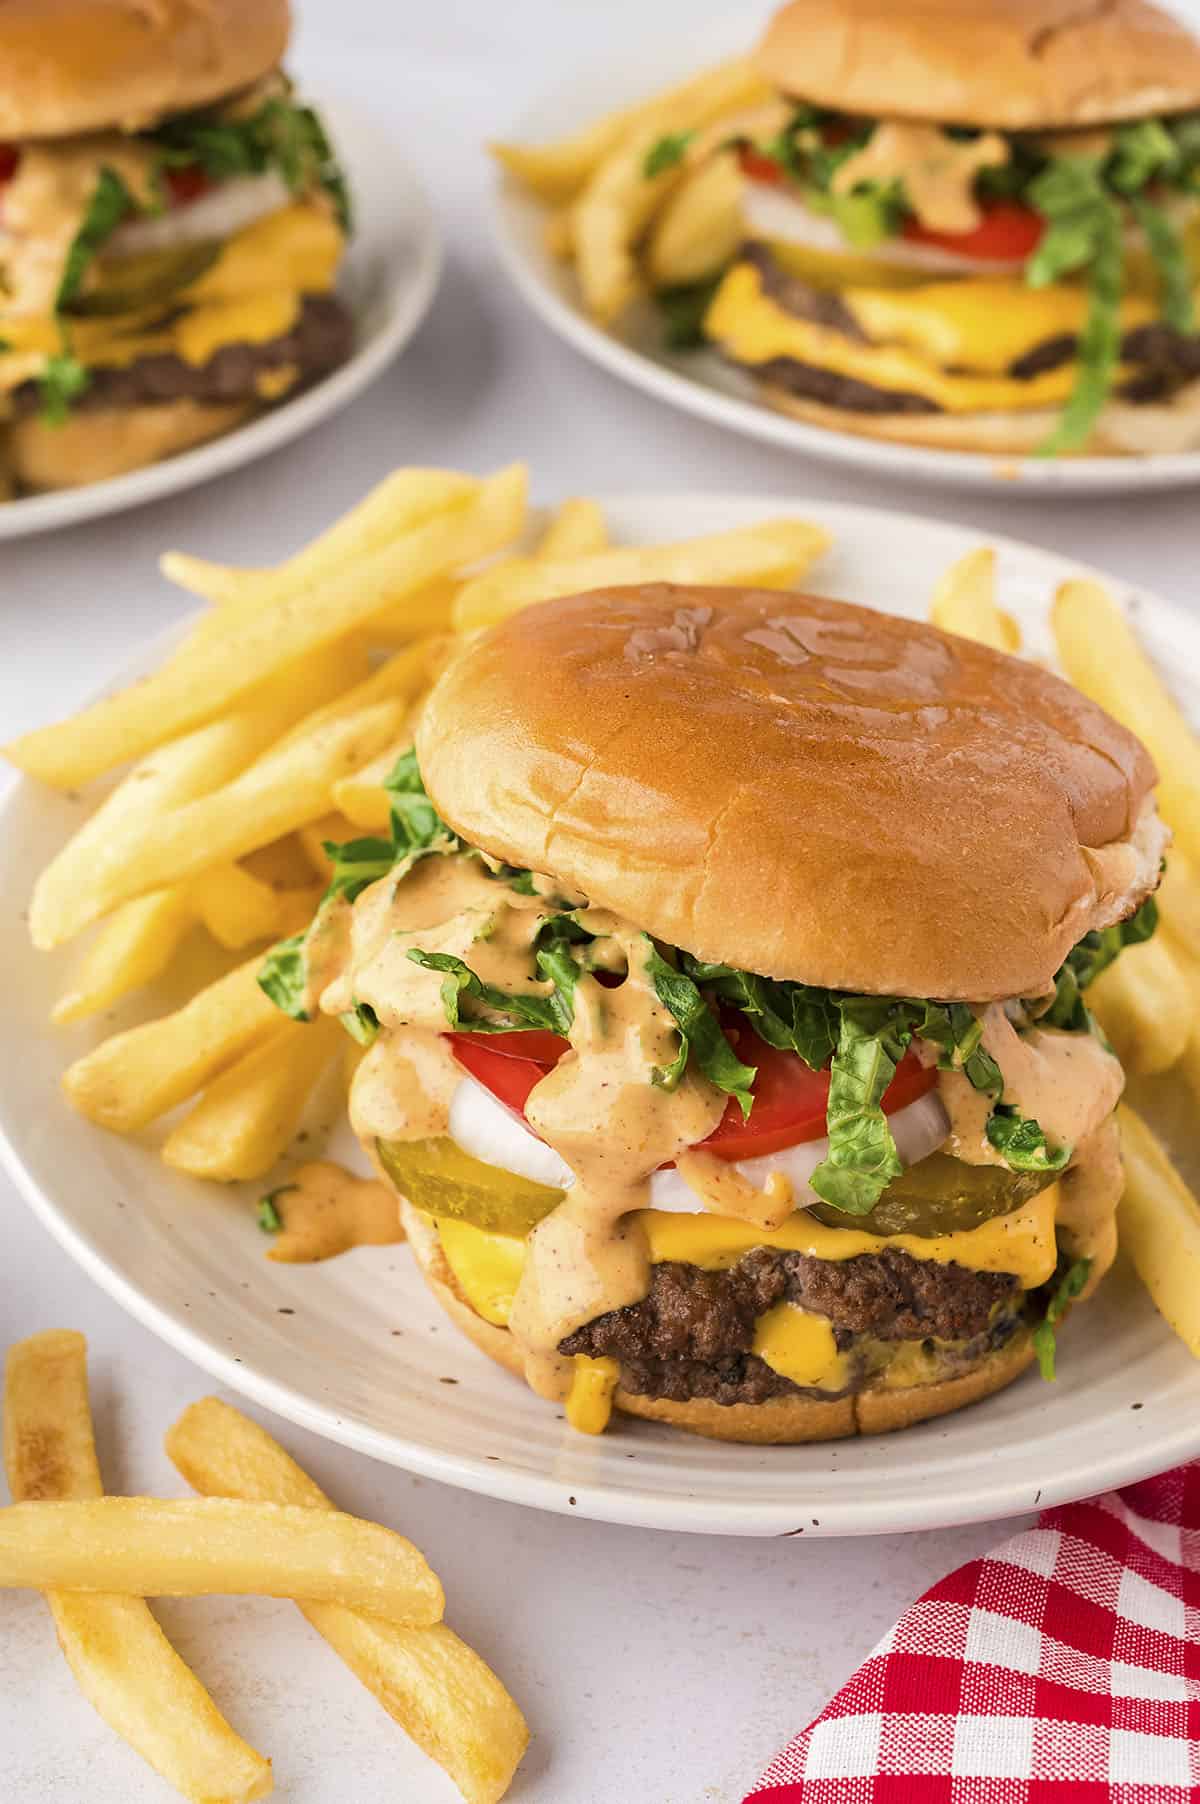 Smash burger recipe on plate with fries.